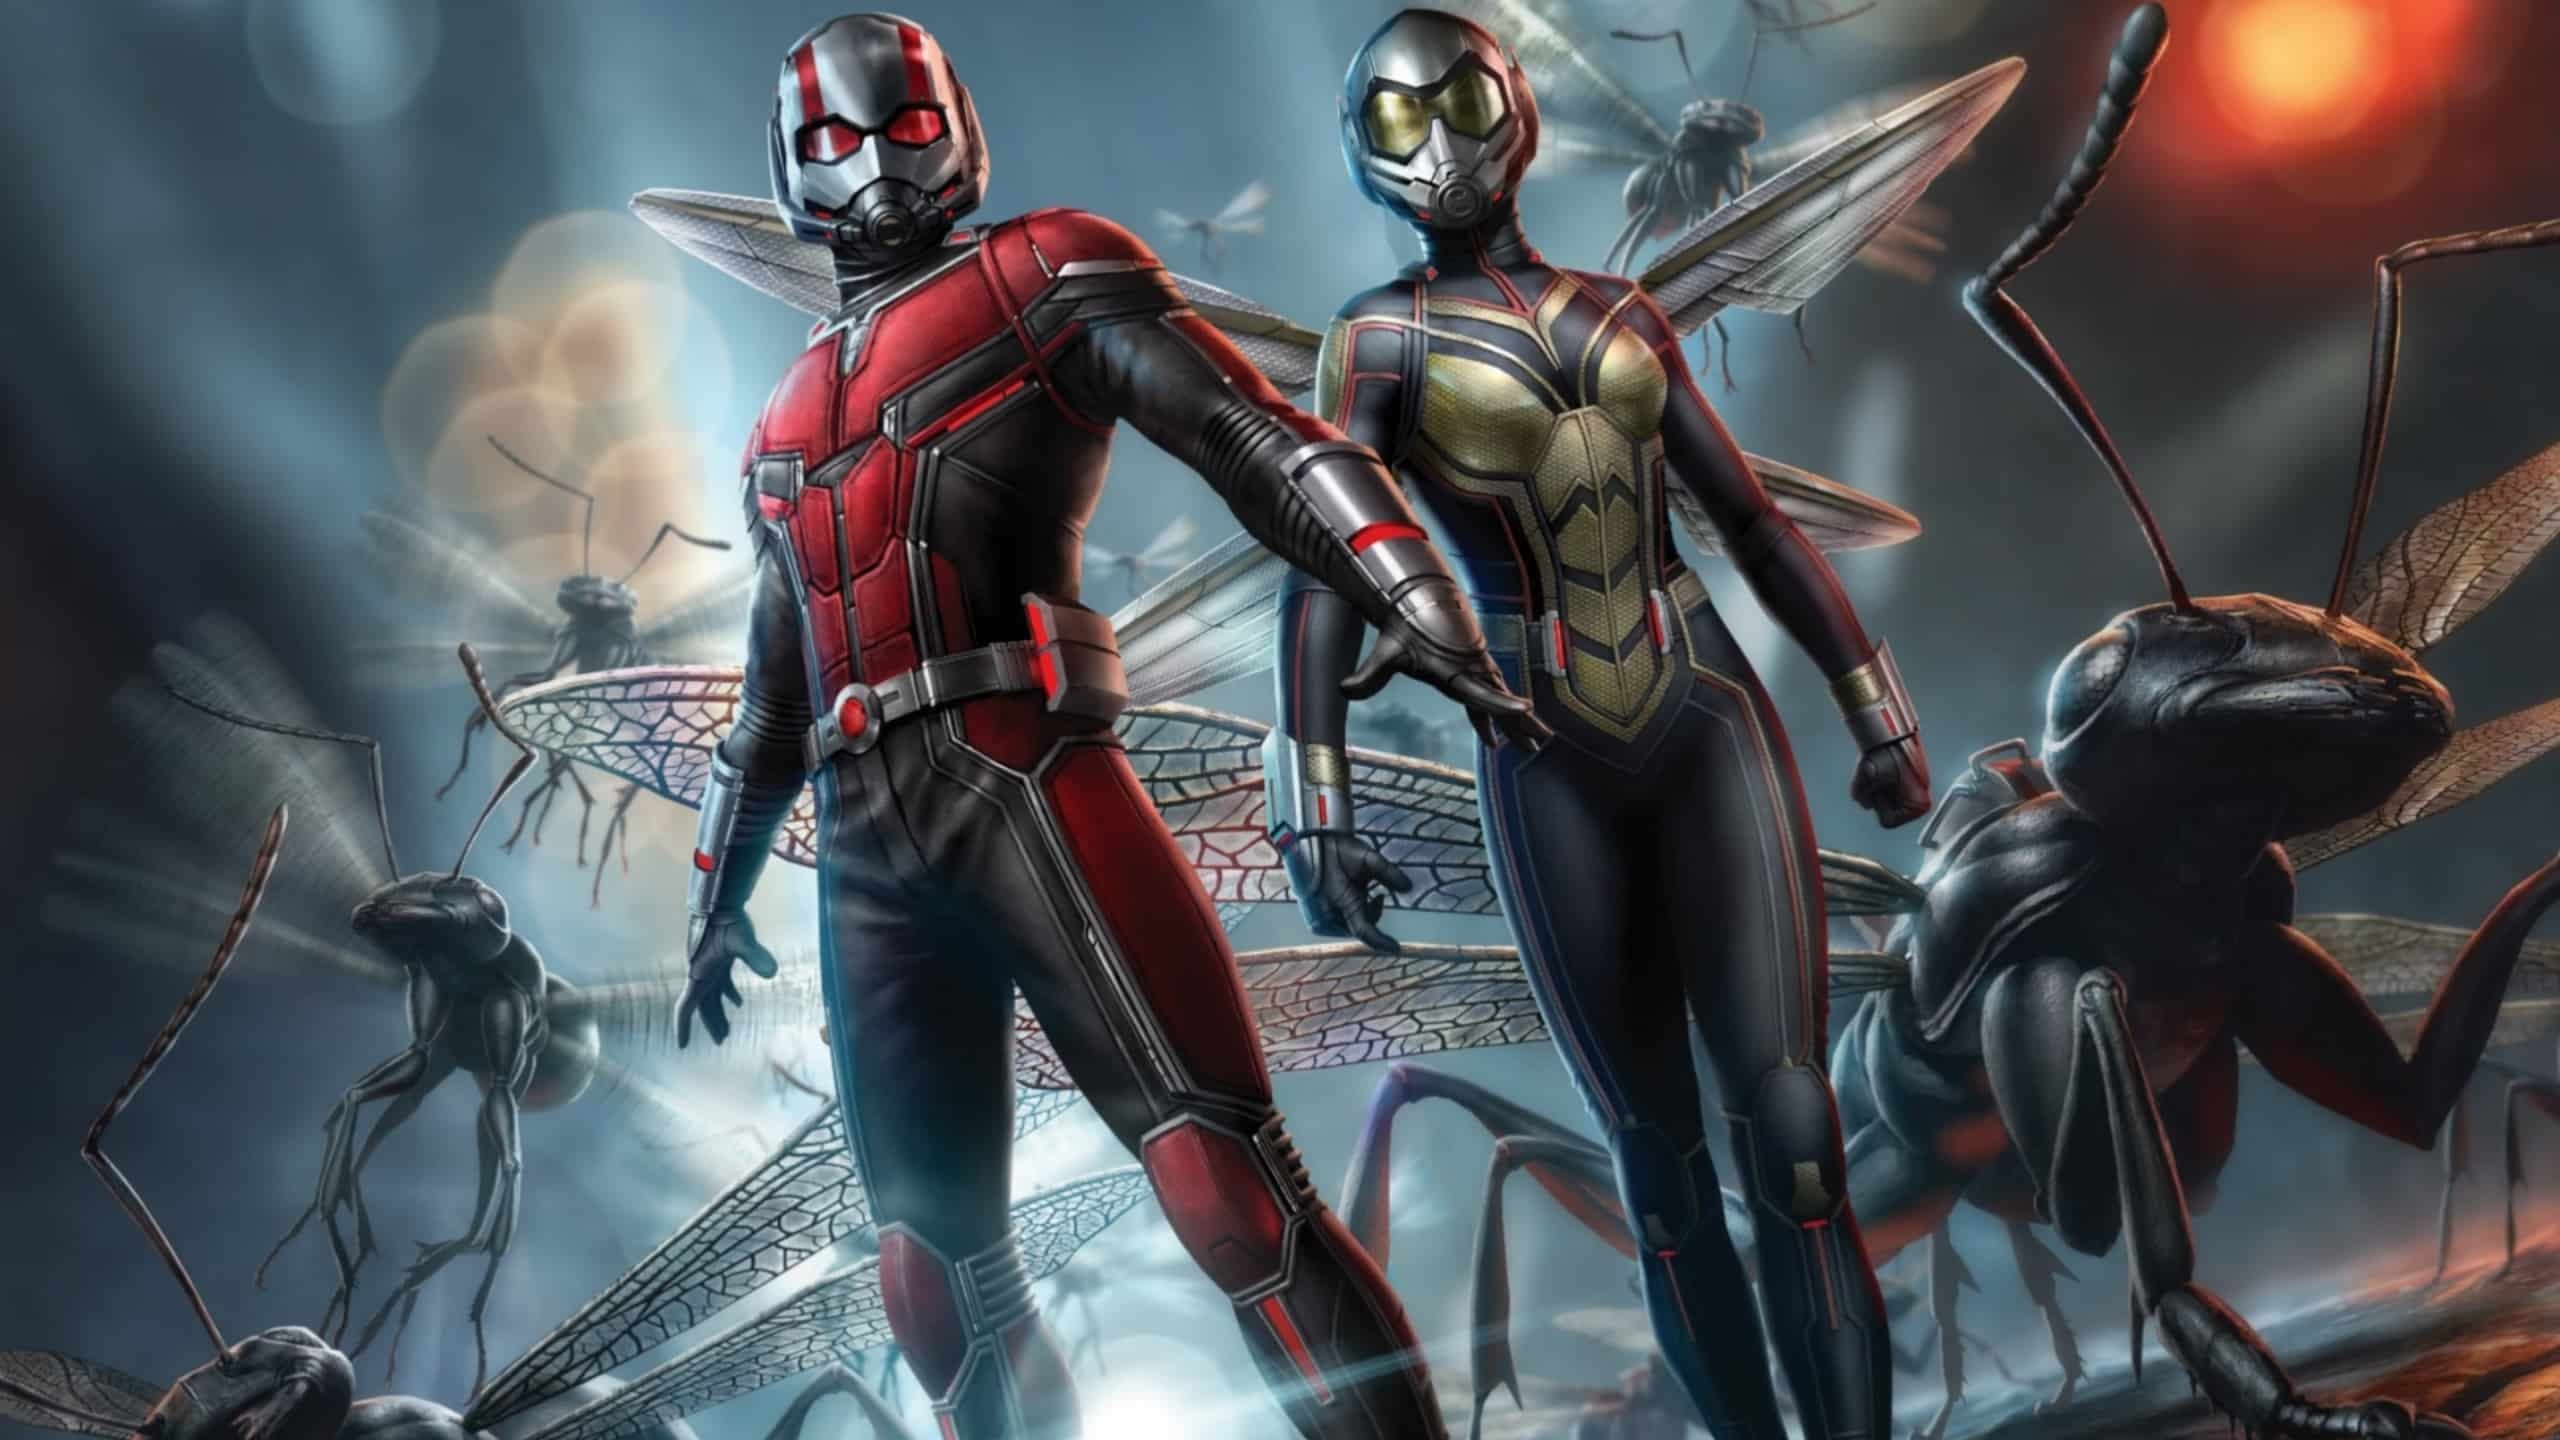 Ant-Man and the Wasp: Quantumania: Scott Lang and Hope Van Dyne, along with Hank Pym and Janet Van Dyne, Exploring the Quantum Realm. 2560x1440 HD Wallpaper.